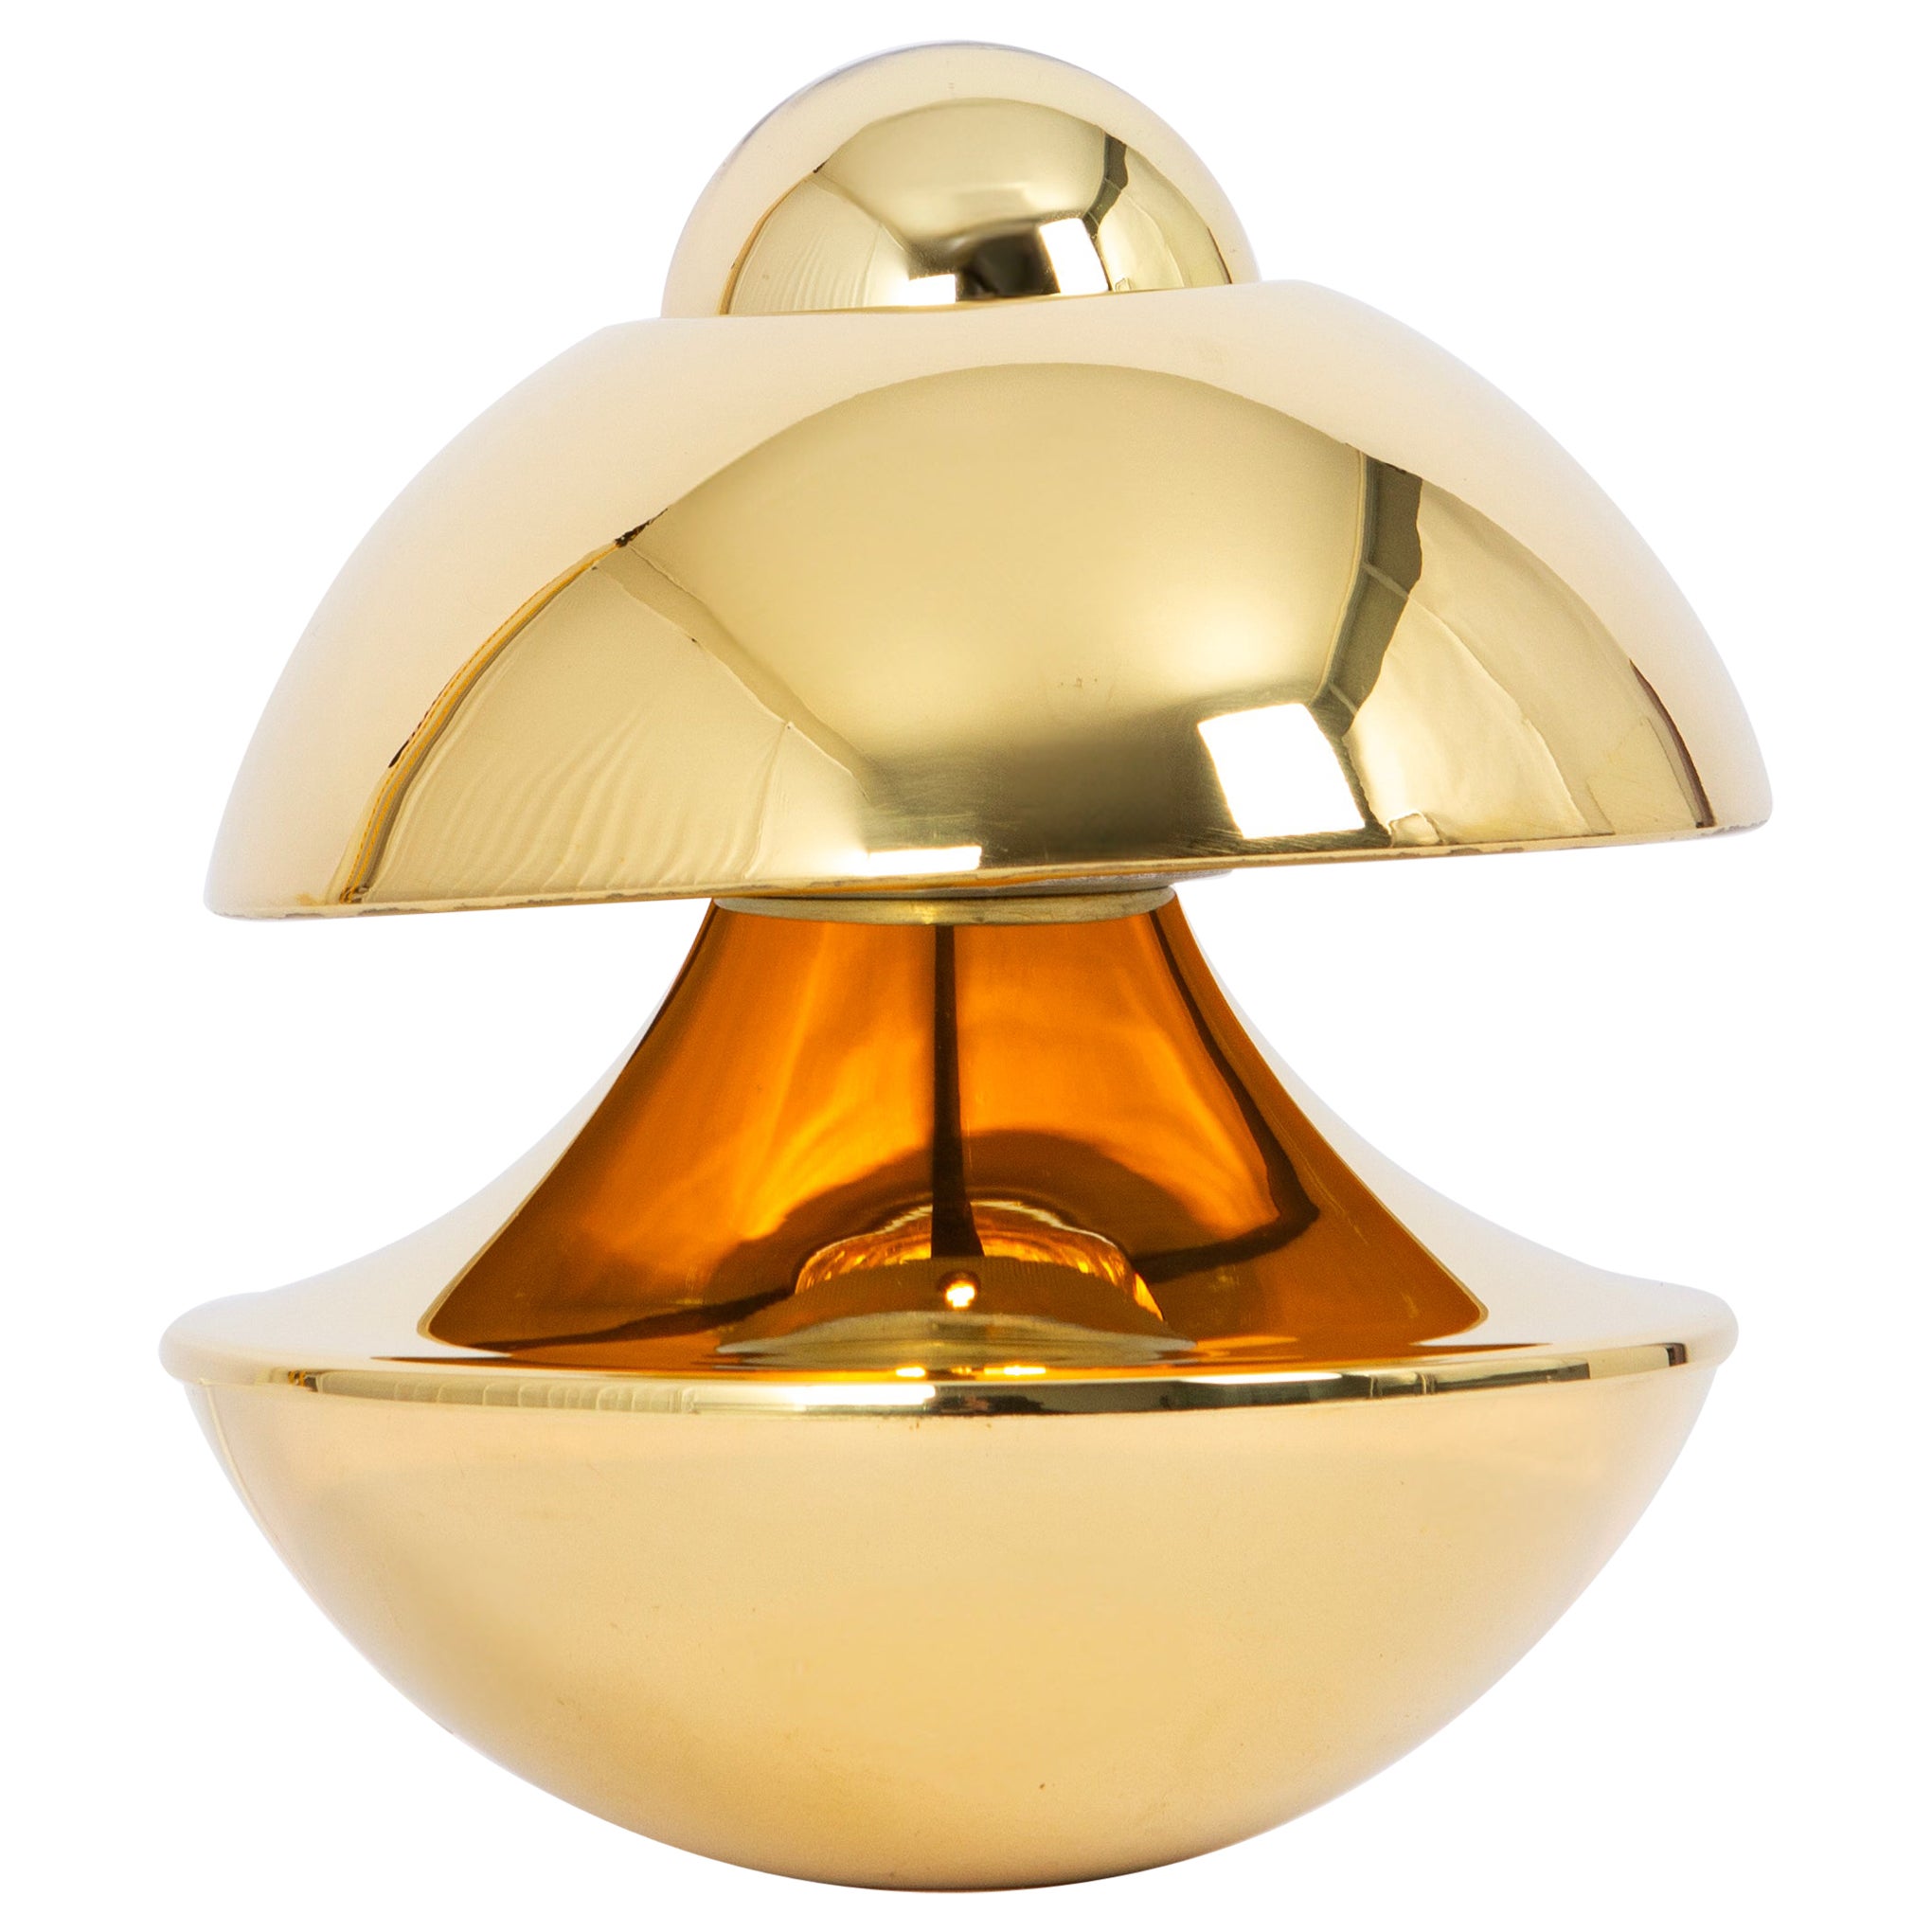 Petite Brass Table lamp designed by Klaus Hempel by Kaiser, Germany, 1970s